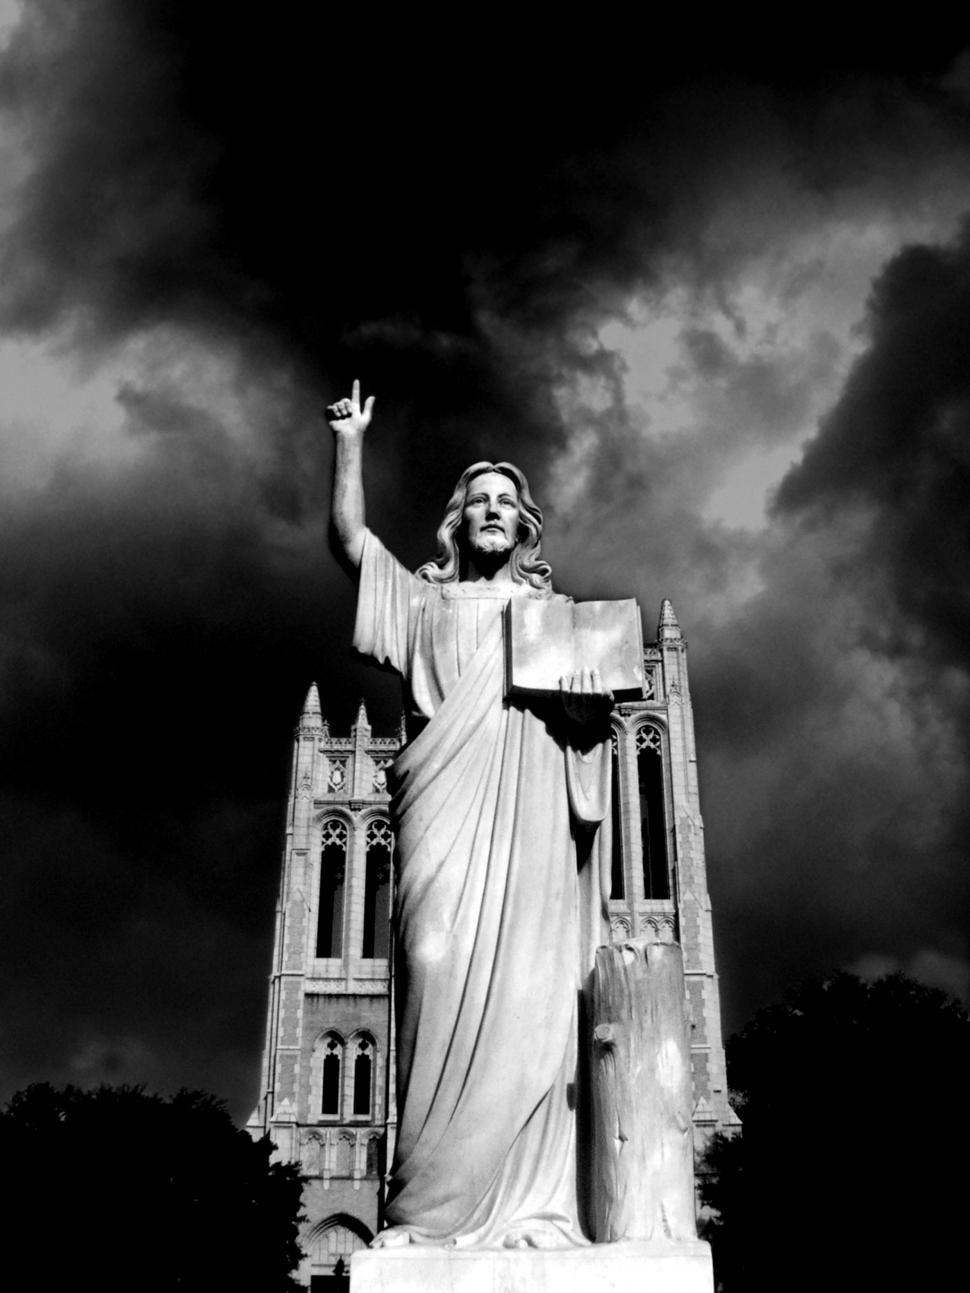 Free Image of Statue of Jesus in Black and White 